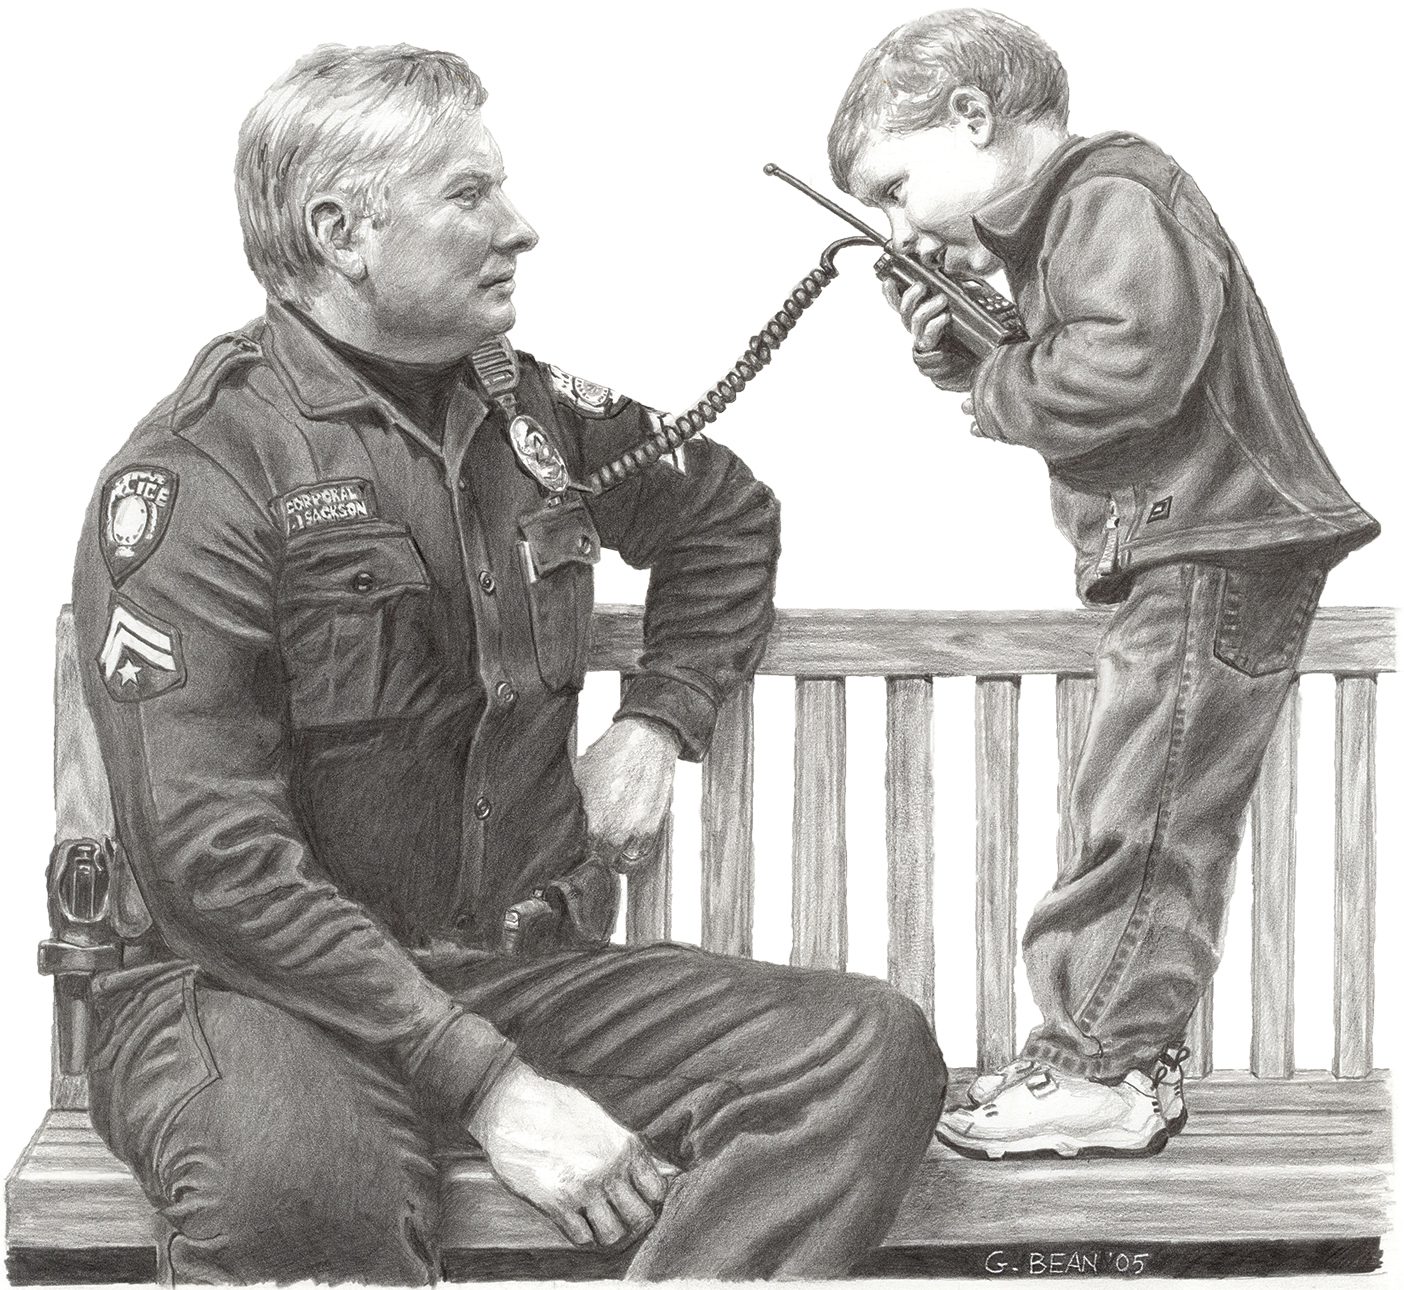 Greg Bean draws a picture in graphite of a Police officer sitting on a bench, looking at a little boy plays with police intercom.